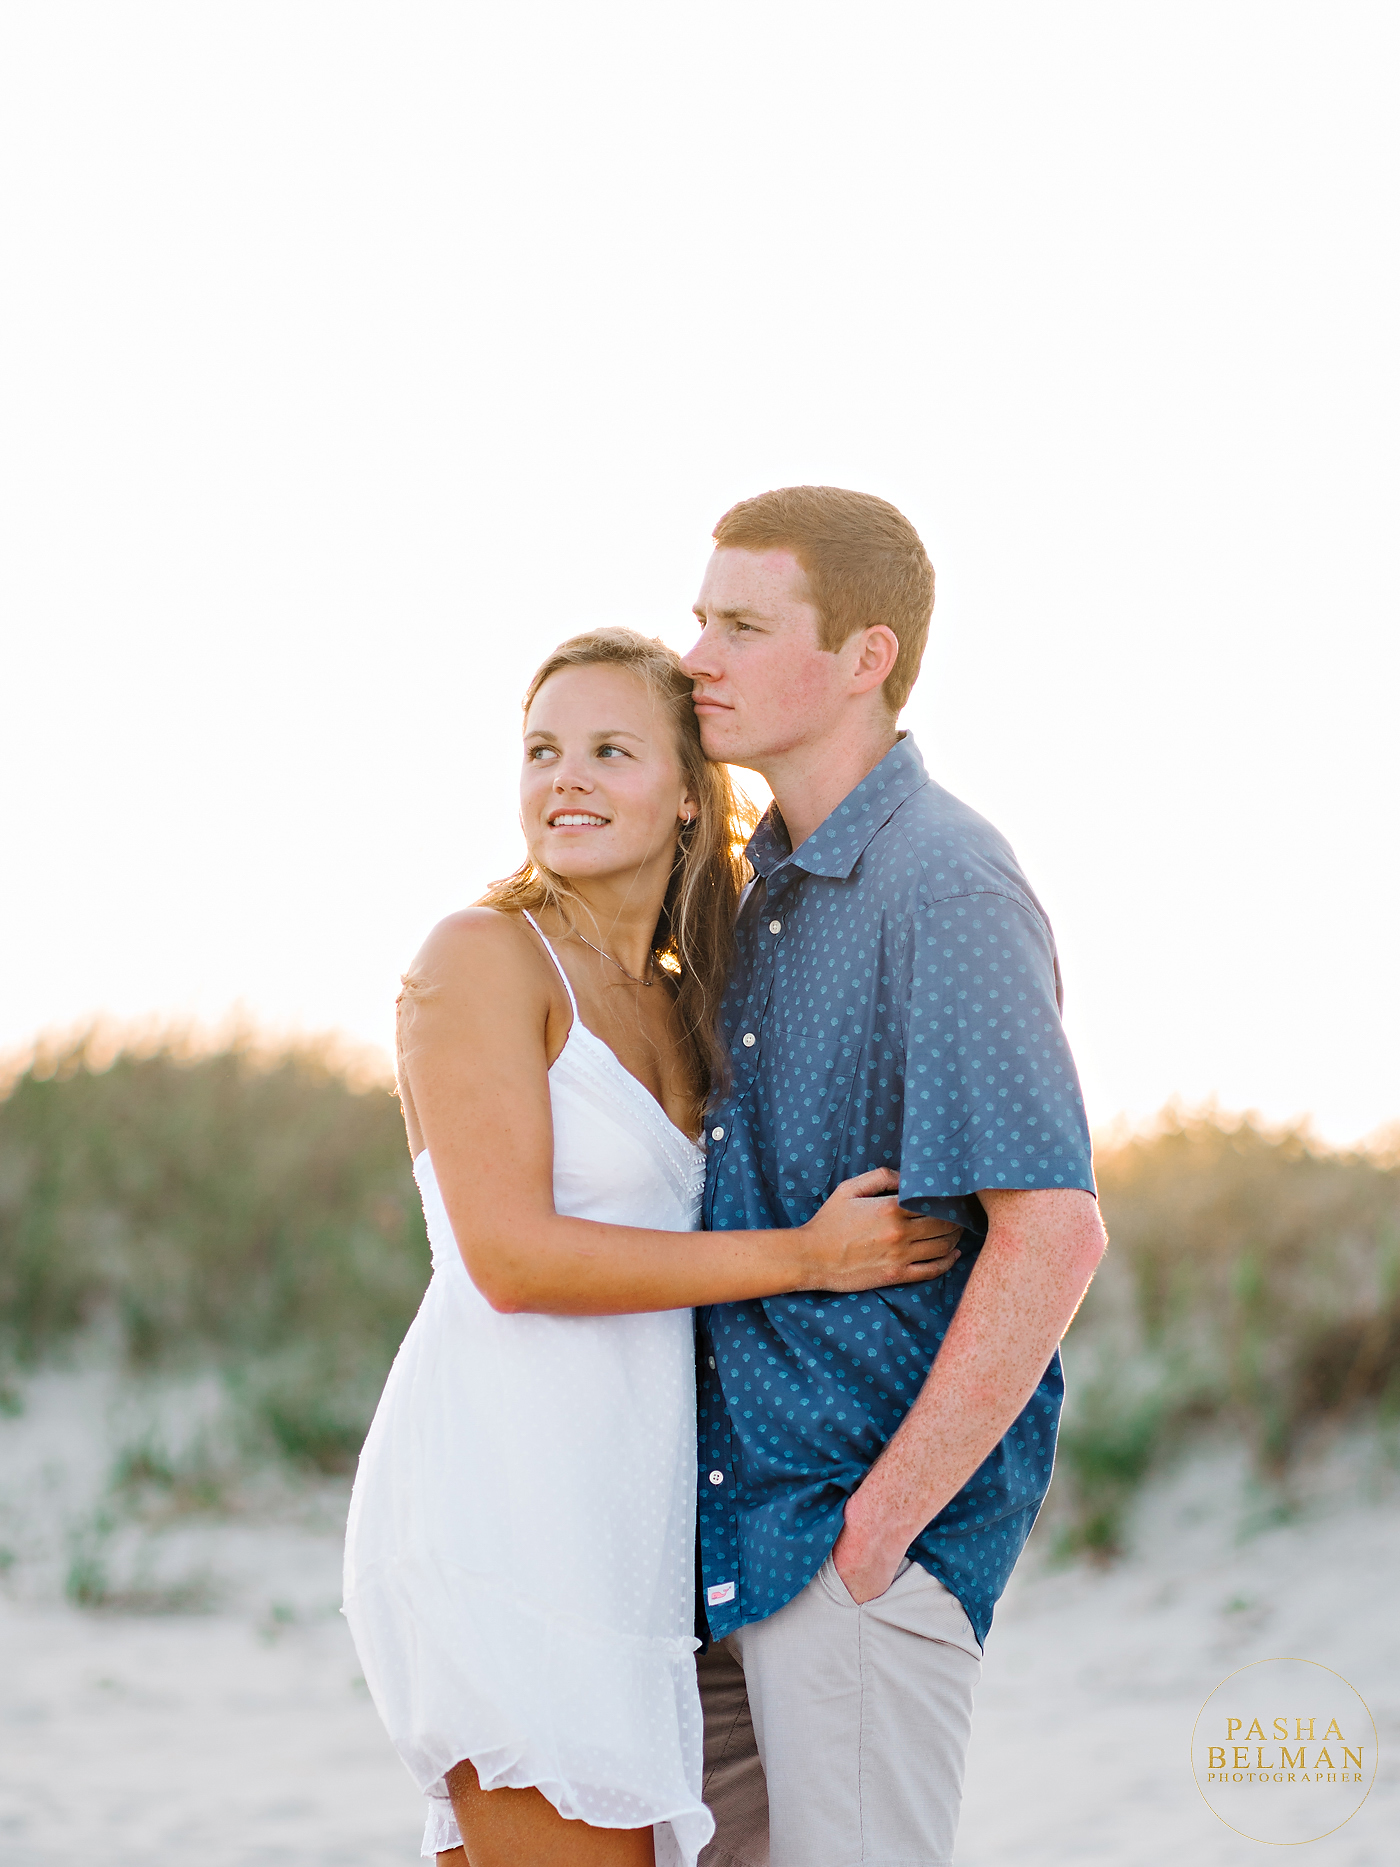 Adorable Couple Engagmenet Photos in White and Blue Outfits 